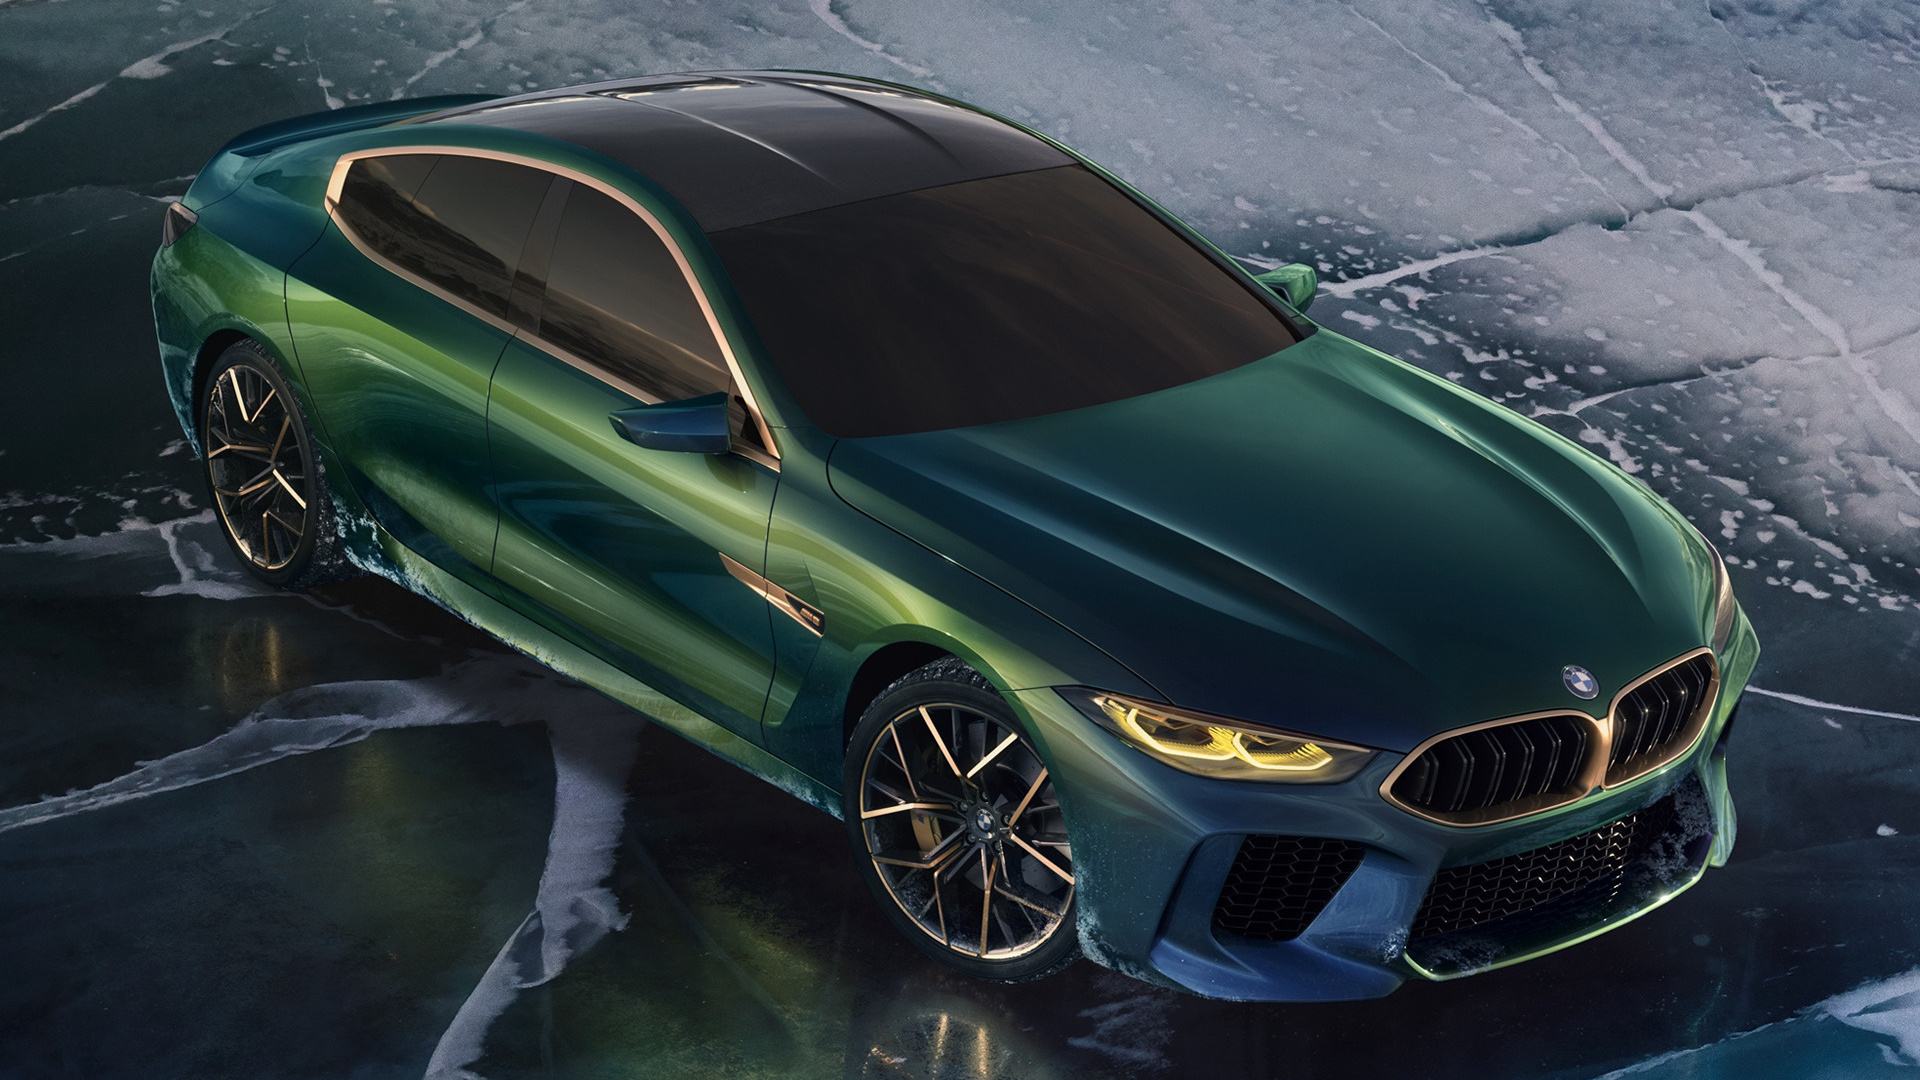 2018 BMW Concept M8 Gran Coupe - Wallpapers and HD Images ...